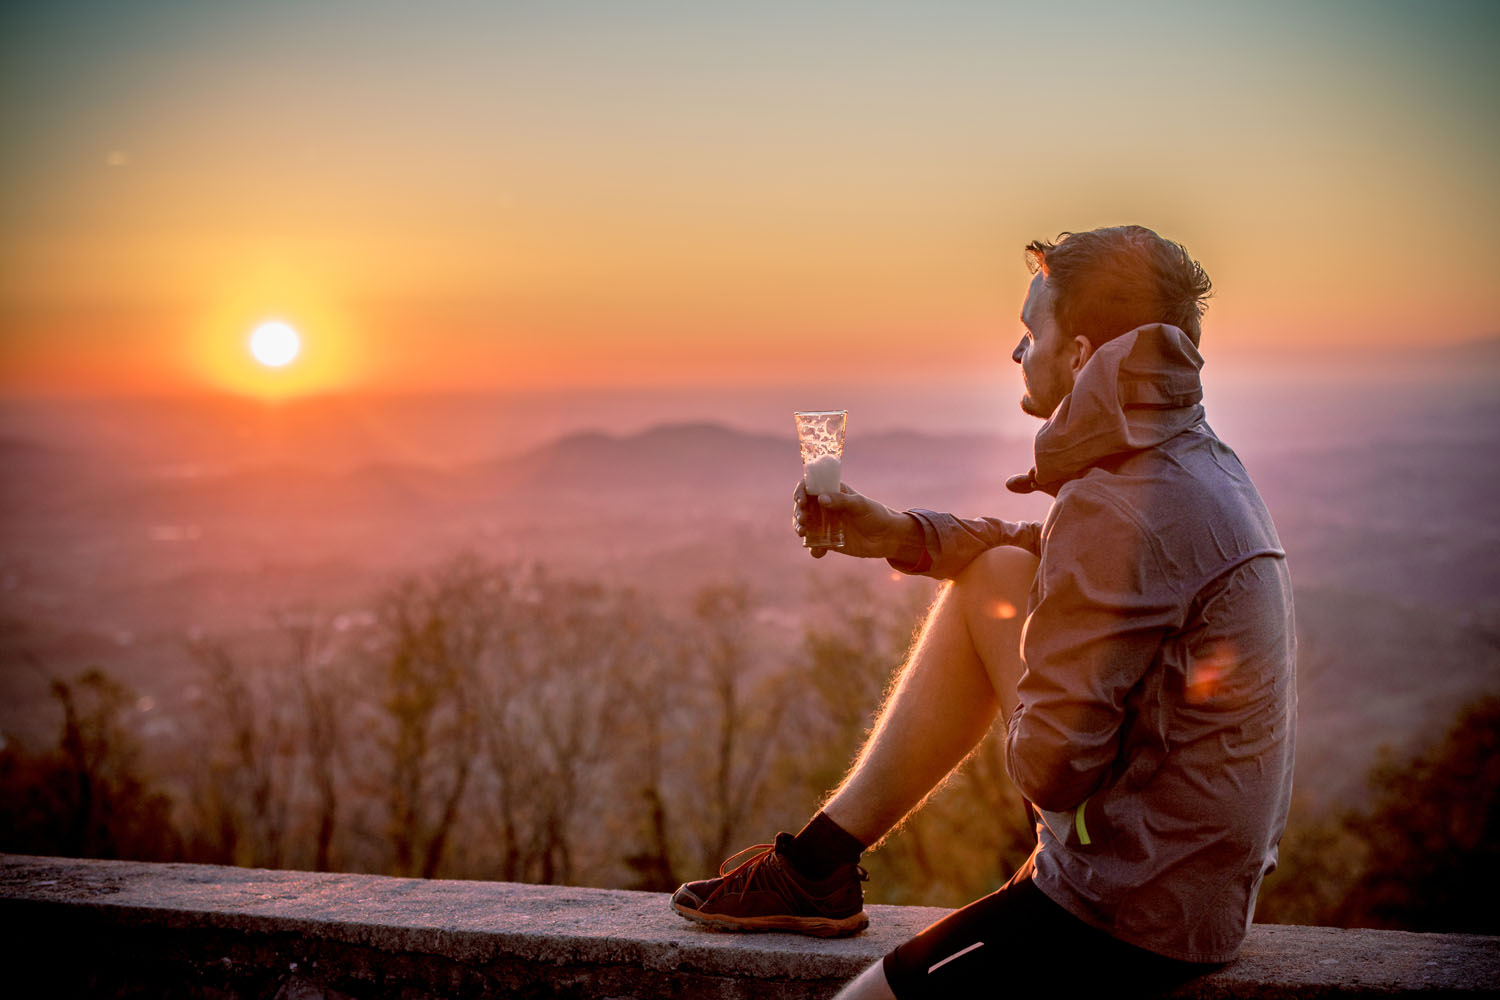 A man sitting on a wall and holding a glass of beer by the sunset.